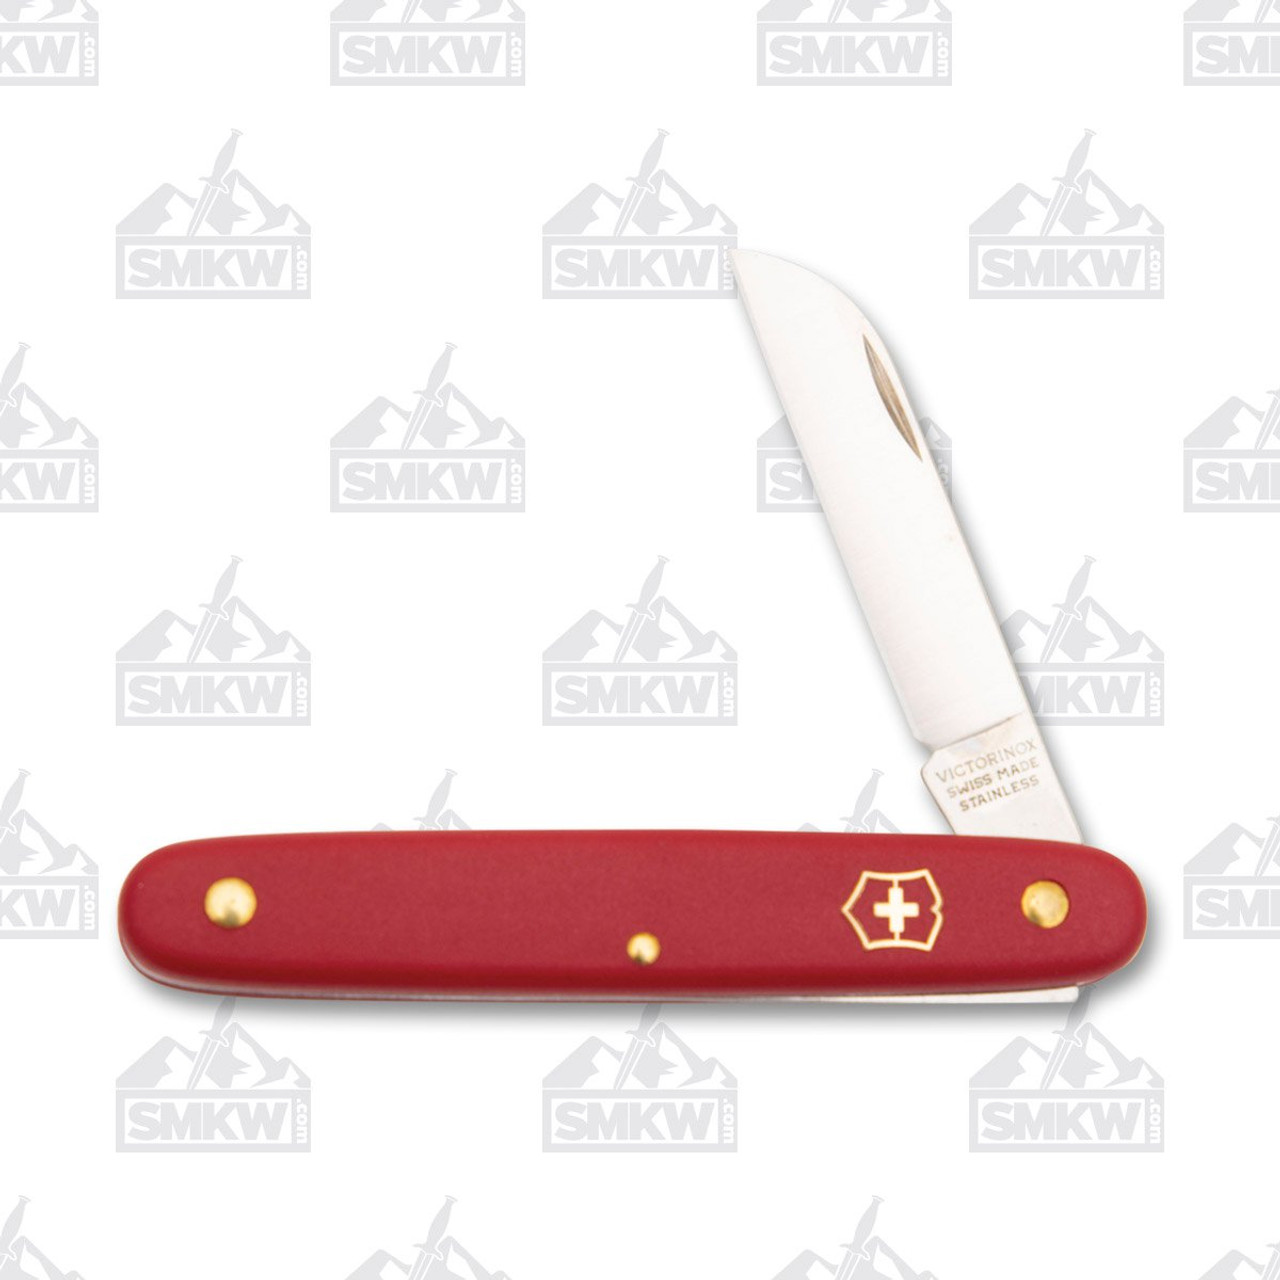 Check this out:Floral Knife